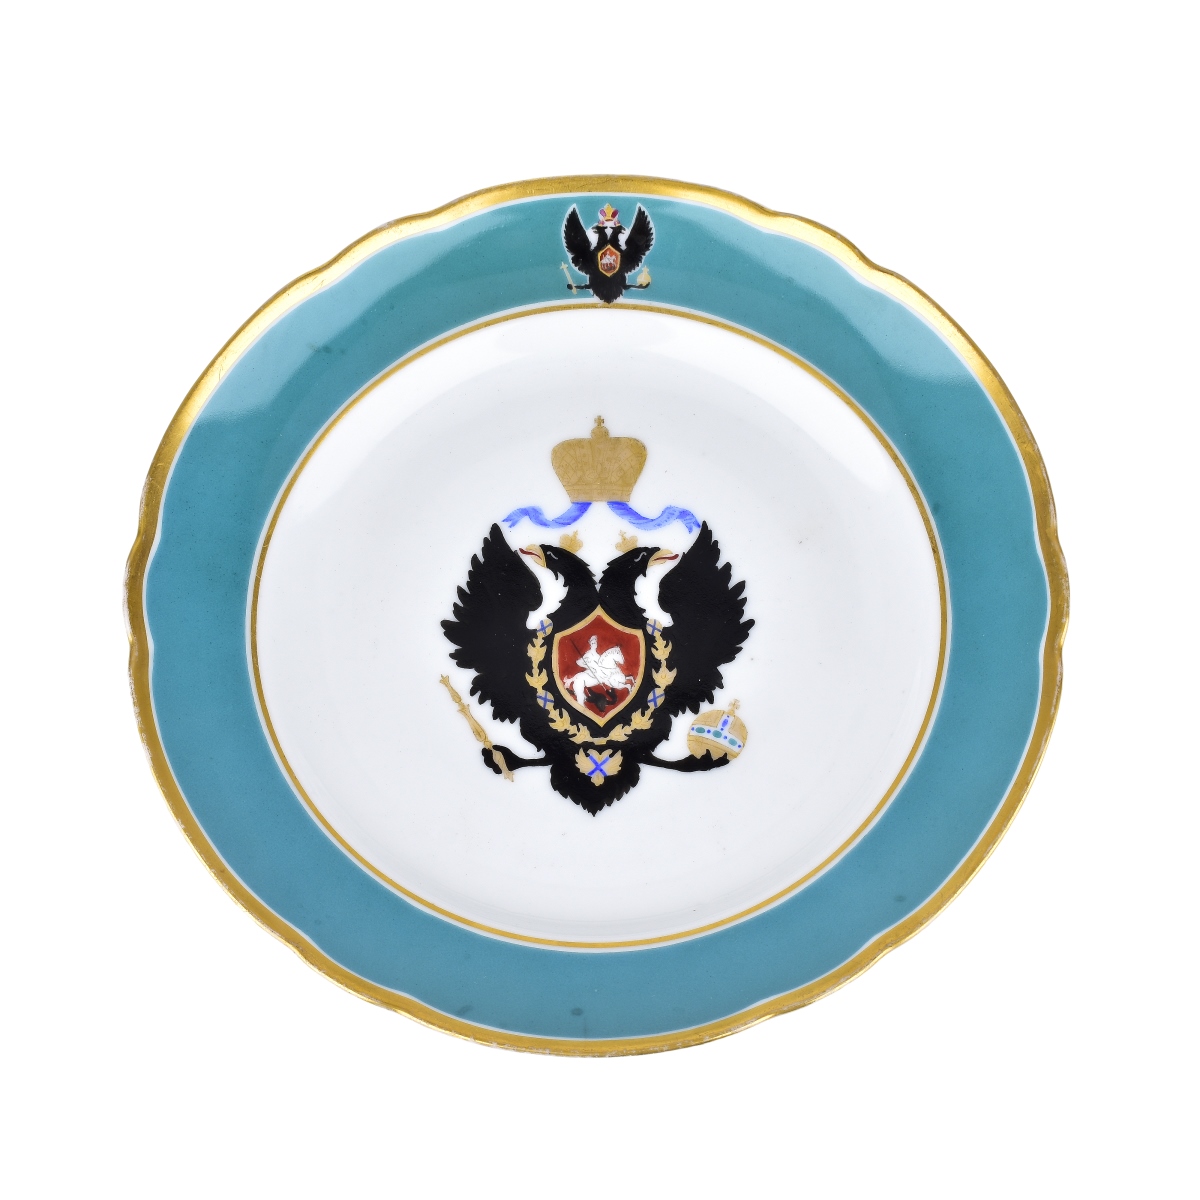 A Russian Imperial Porcelain Factory Plate